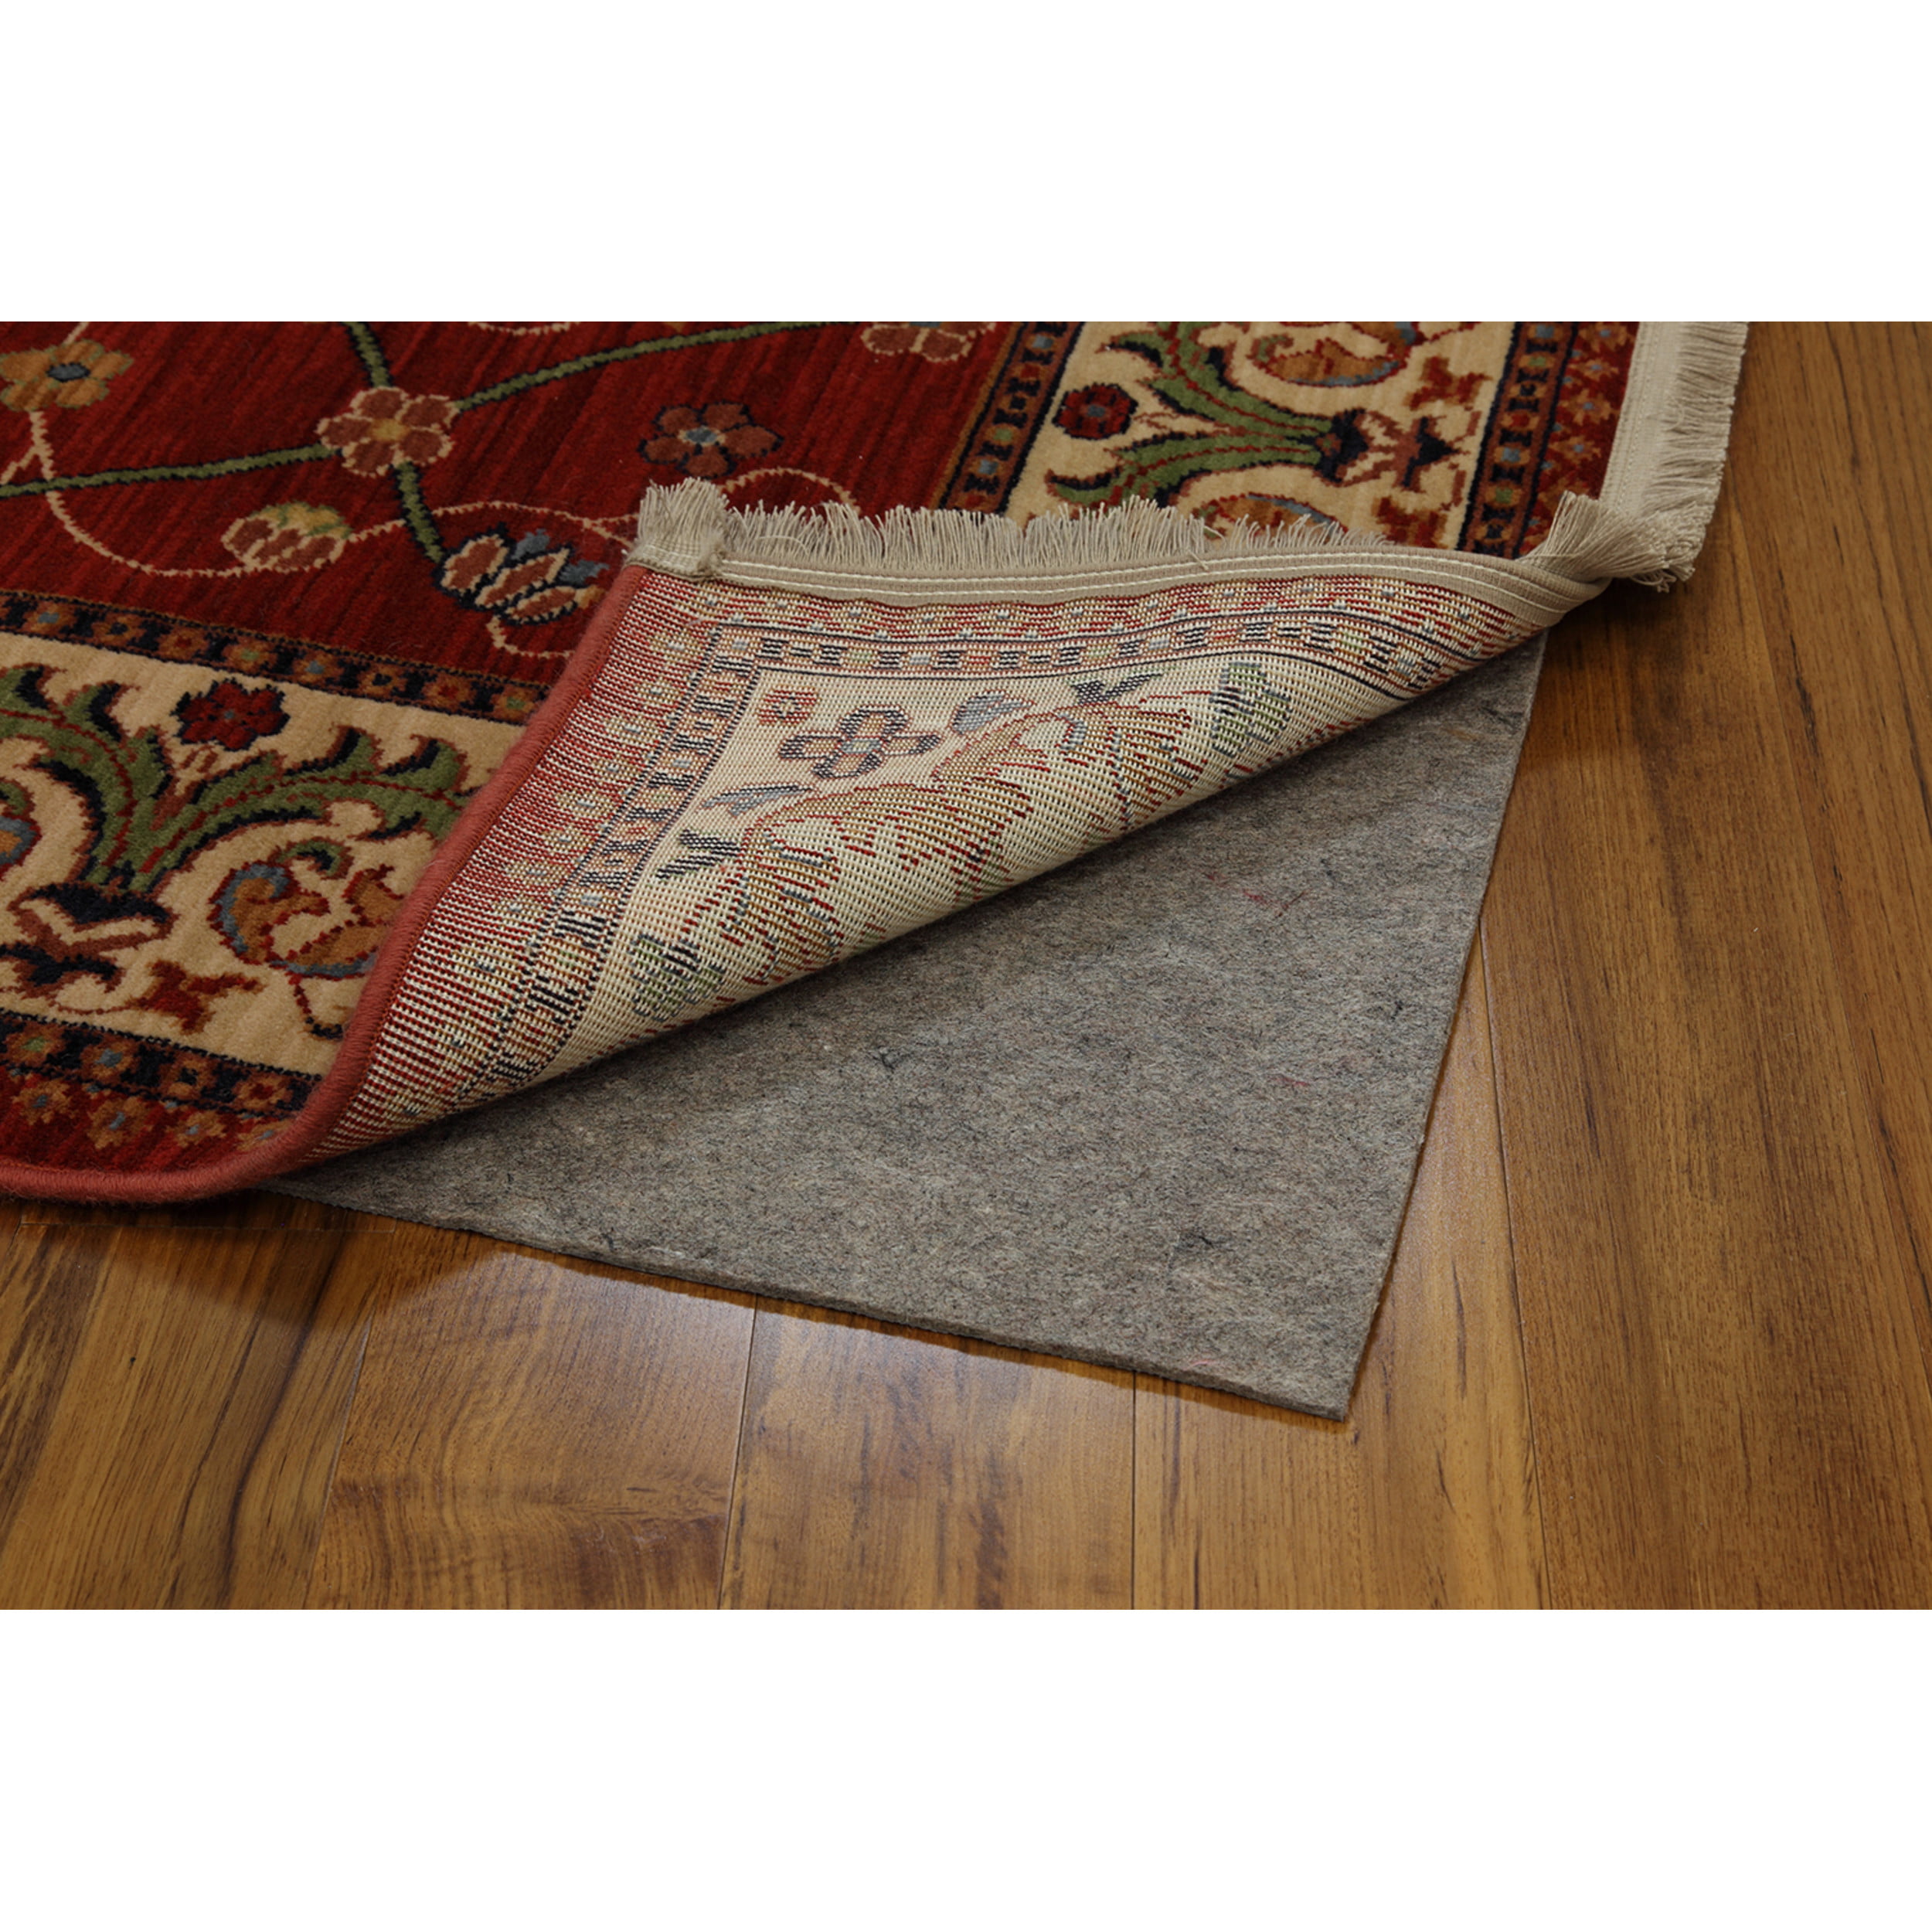 8'x10' 40 Ounce Area Rug Carpet Pad. Over 1/2 Thick Authentic Mohawk Industries